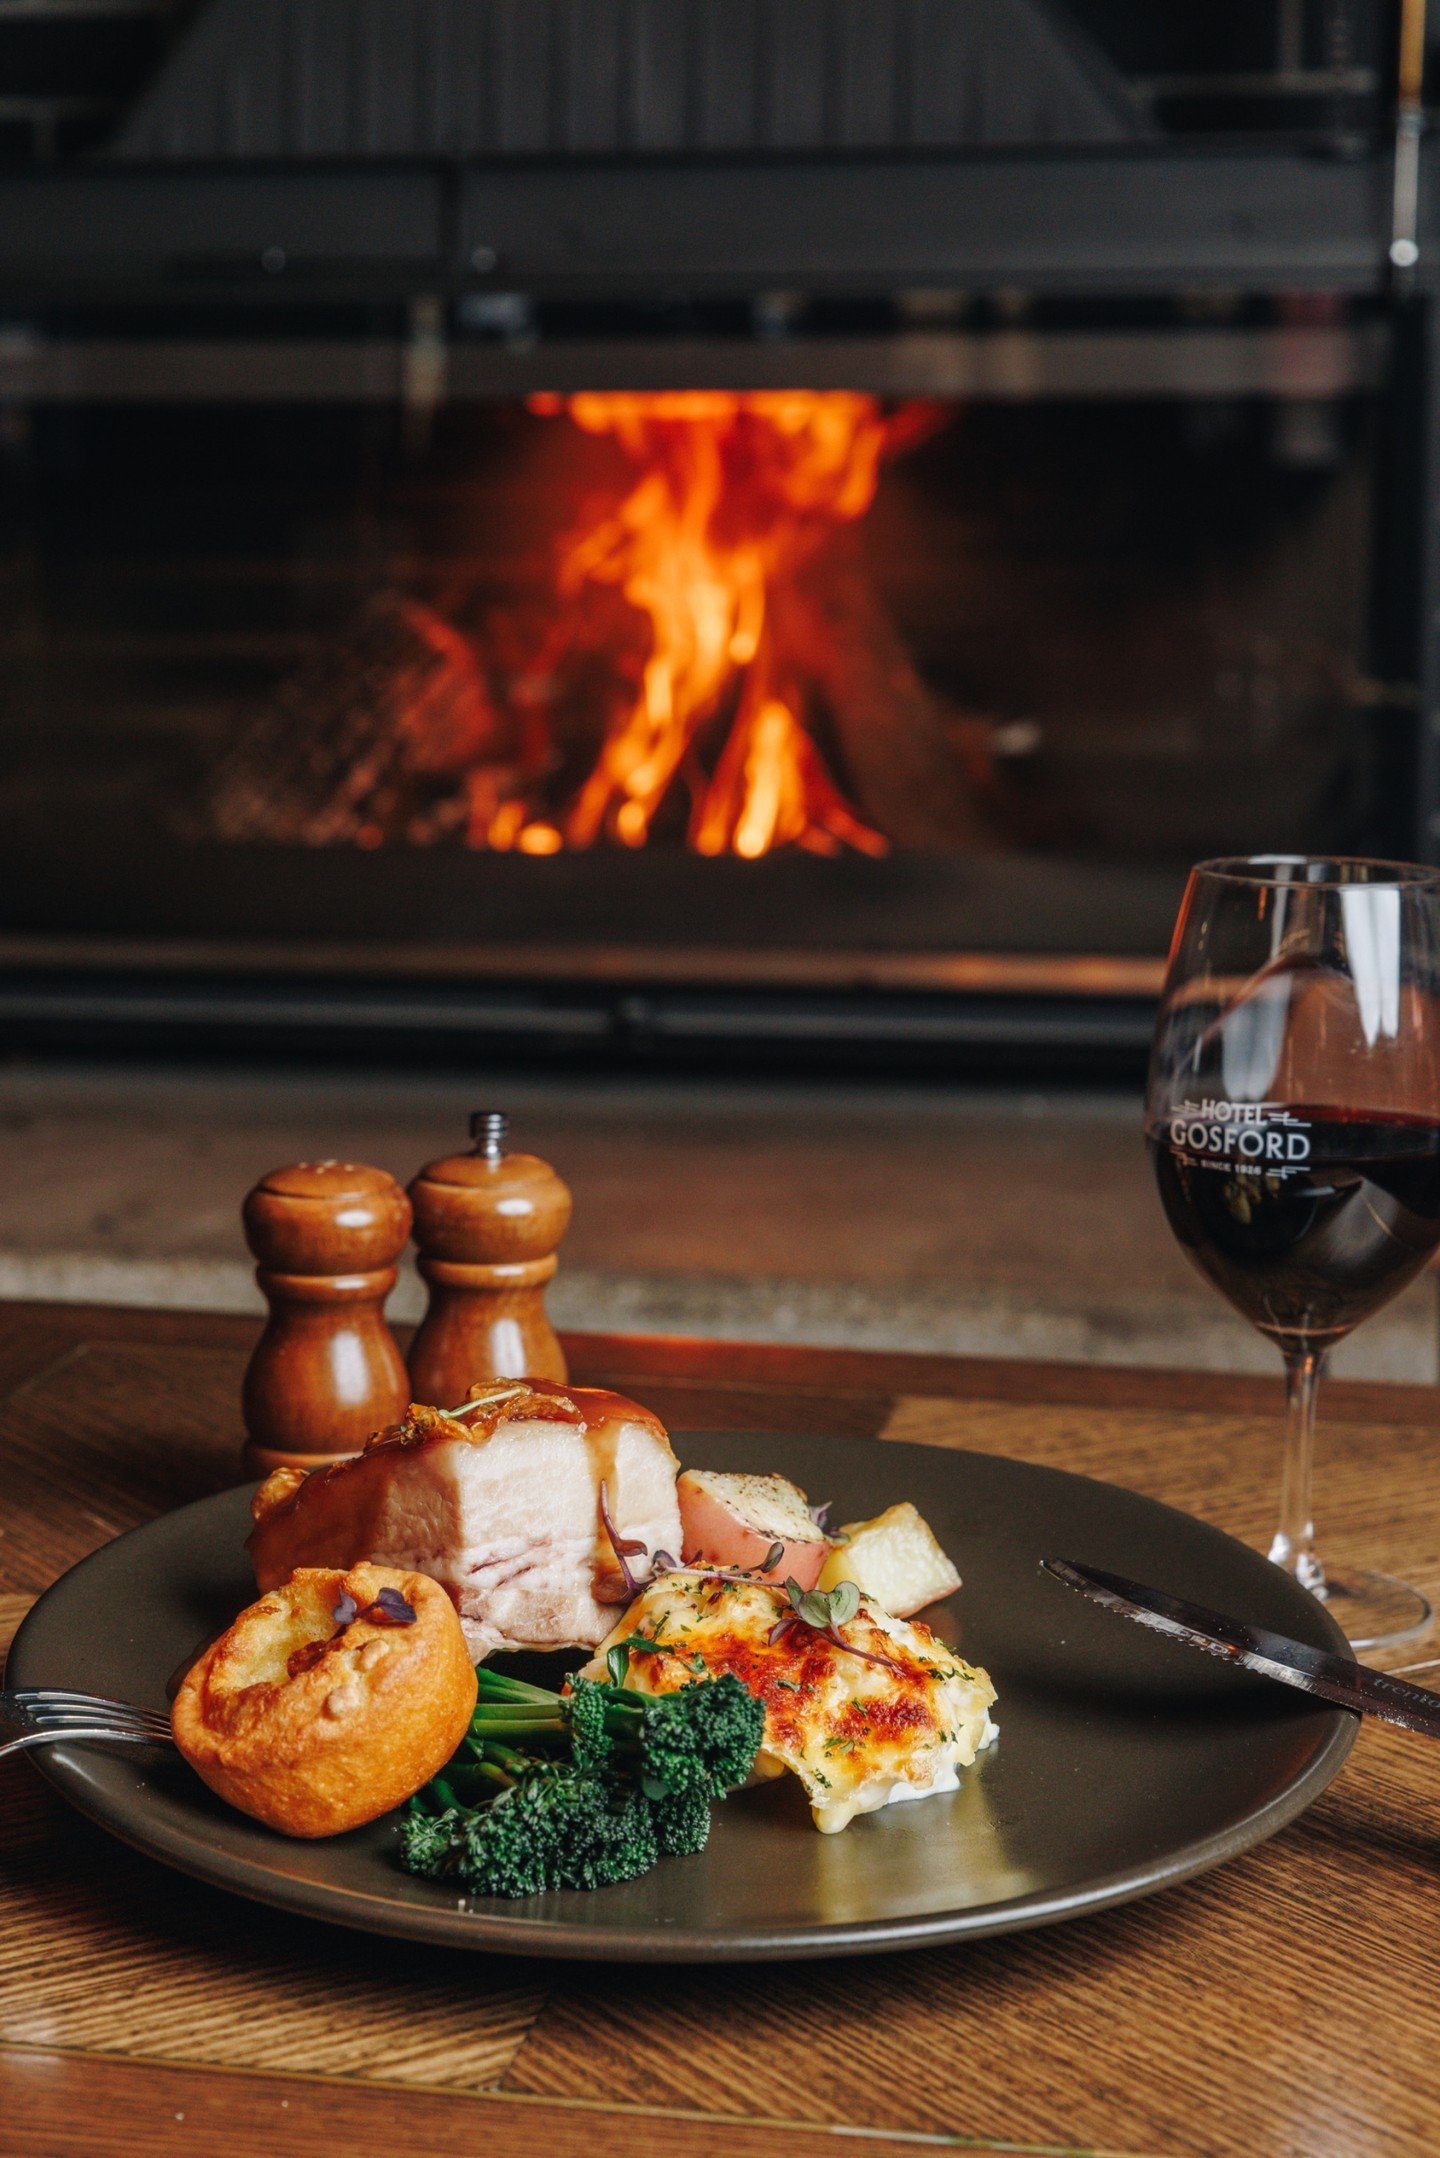 We're calling it - Roast SZN officially starts now!

Make the most of your day with our Classic Sunday Roast. It's juicy, and best enjoyed in front of the fire with the soothing sounds of Tom Hutchins.

#HotelGosford #NextLevelPubFood #SundaySession 